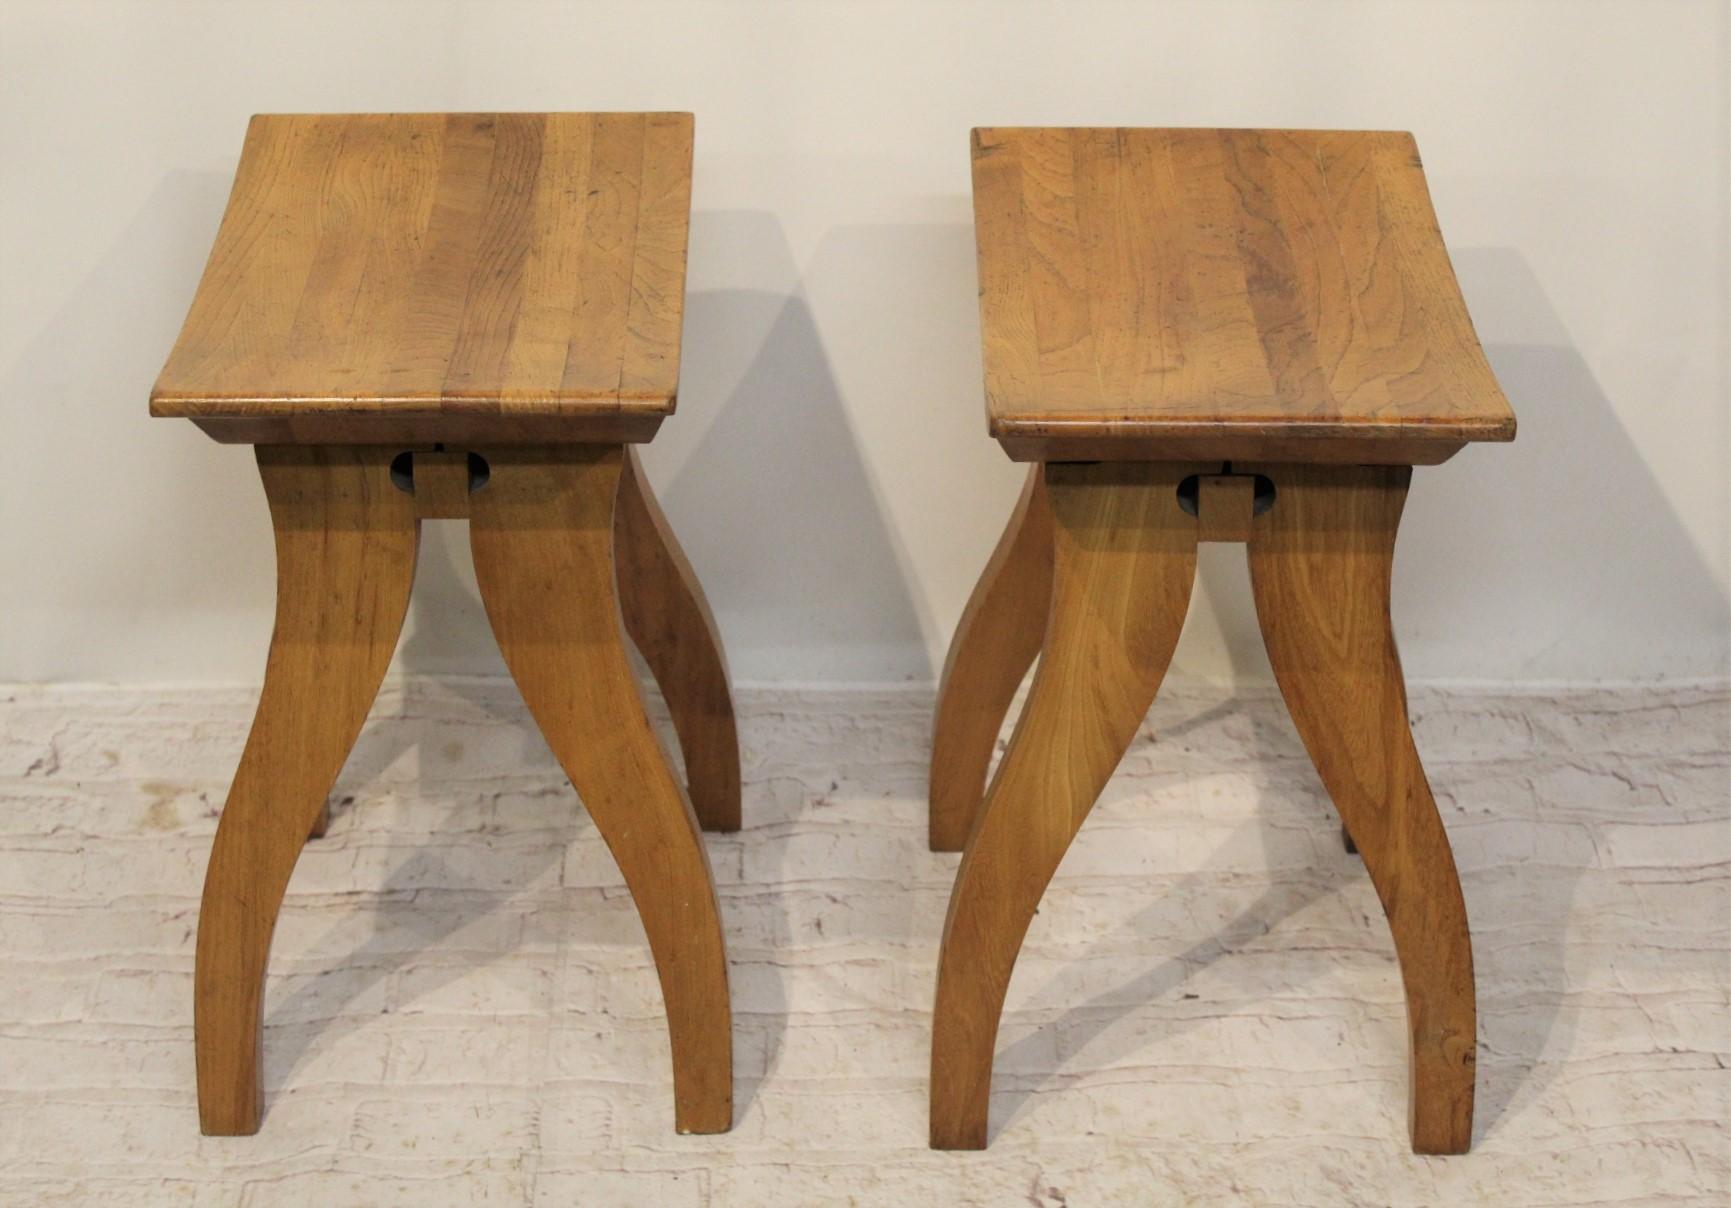 A pair of the finest Arts & Crafts style stools, made from solid maple timber and of a unique bolt tightening adjustable design, so the legs can be tightened over time, these date from the 1960s and are of English origin.
The saddle style seats are